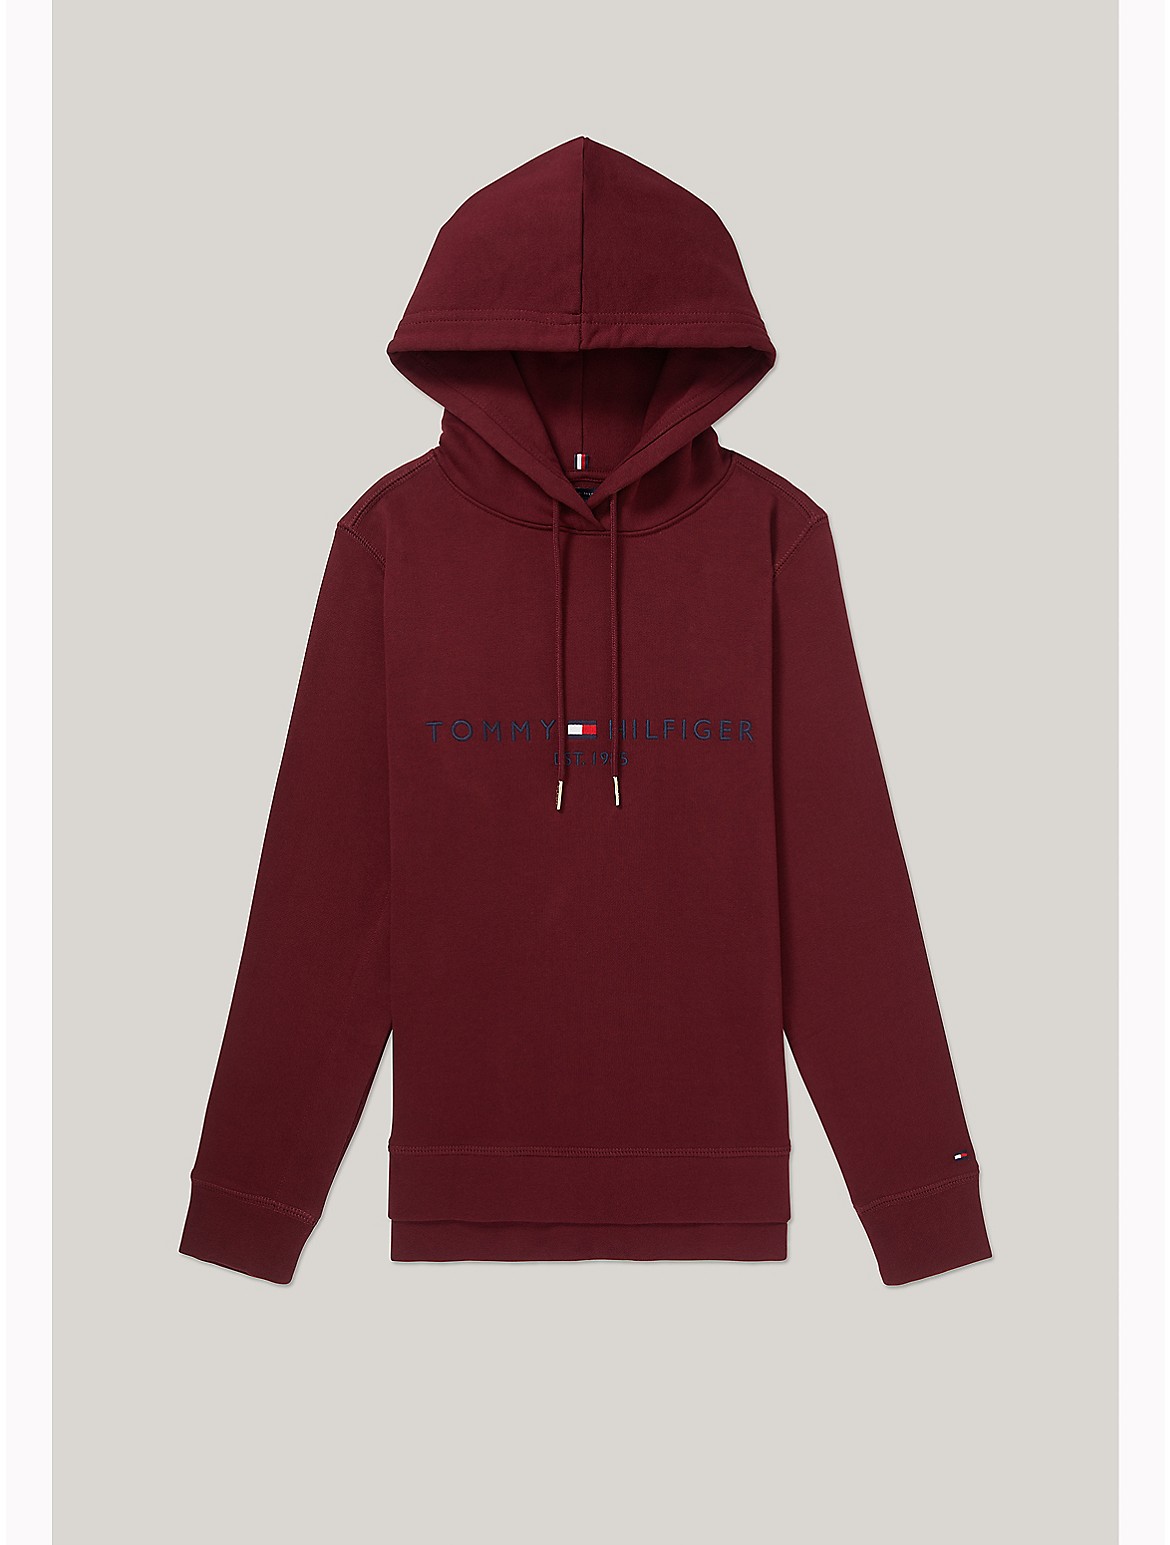 Tommy Hilfiger Women's Seated Fit Logo Hoodie